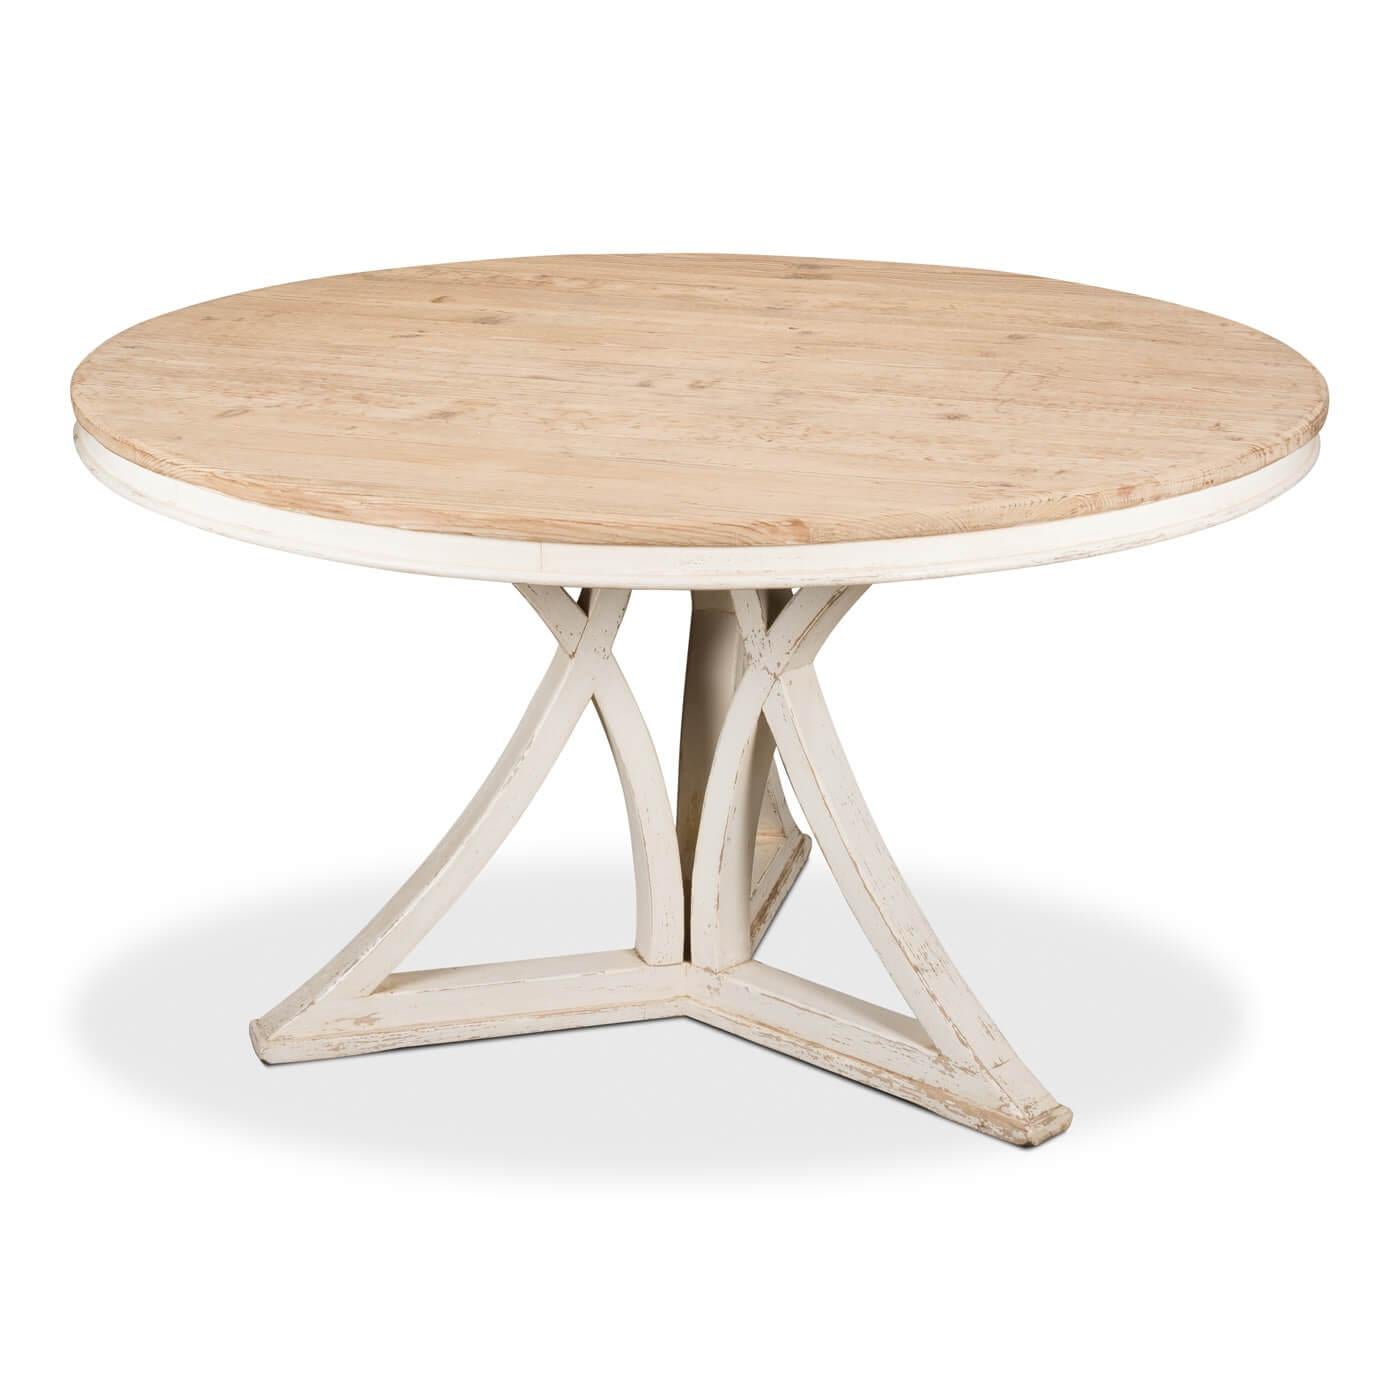 Modern rustic round dining table with natural pine top and an unusual form distressed white base. 

Dimensions: 54